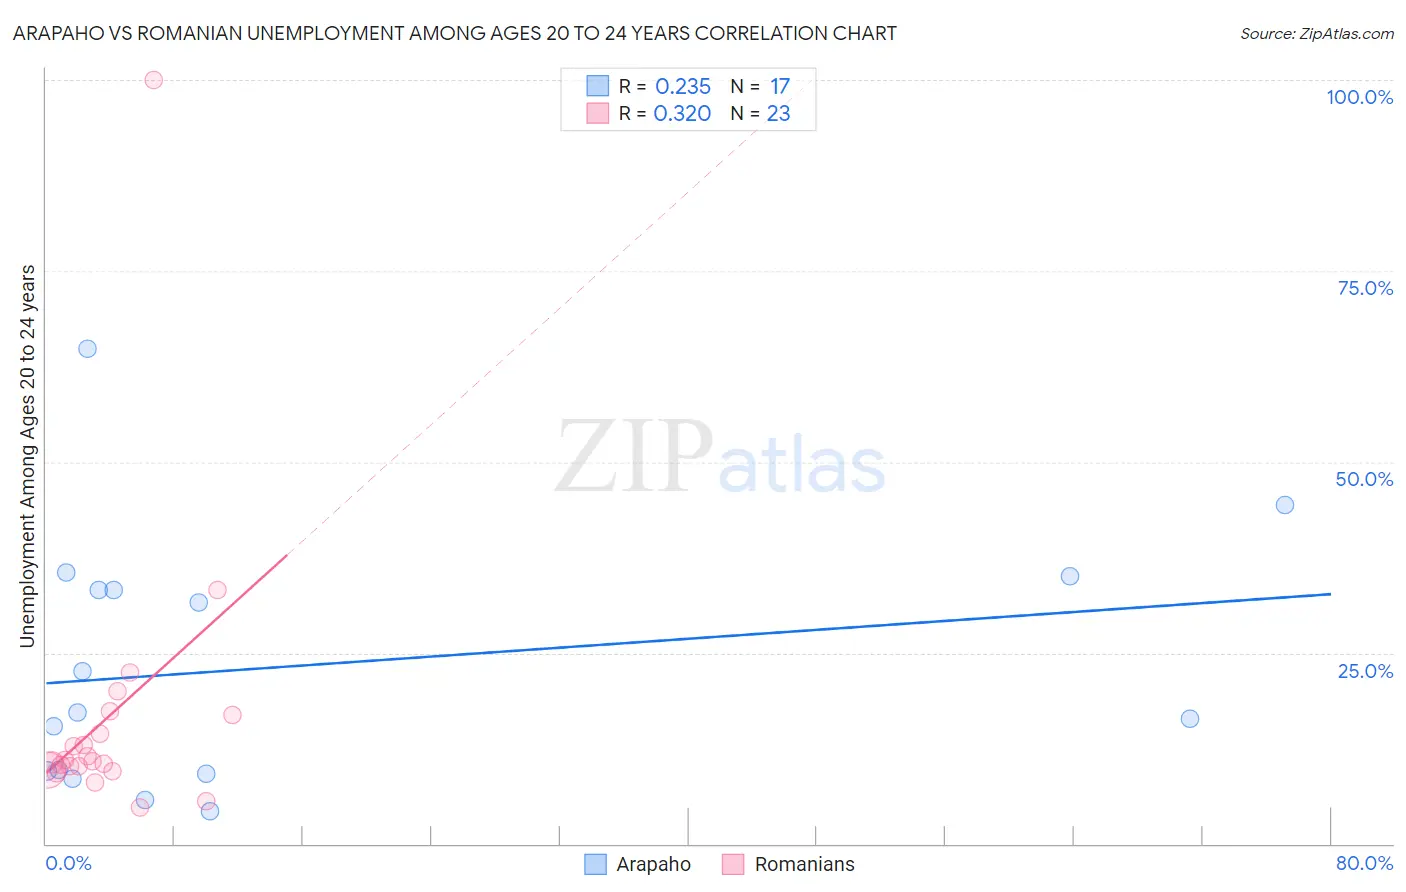 Arapaho vs Romanian Unemployment Among Ages 20 to 24 years